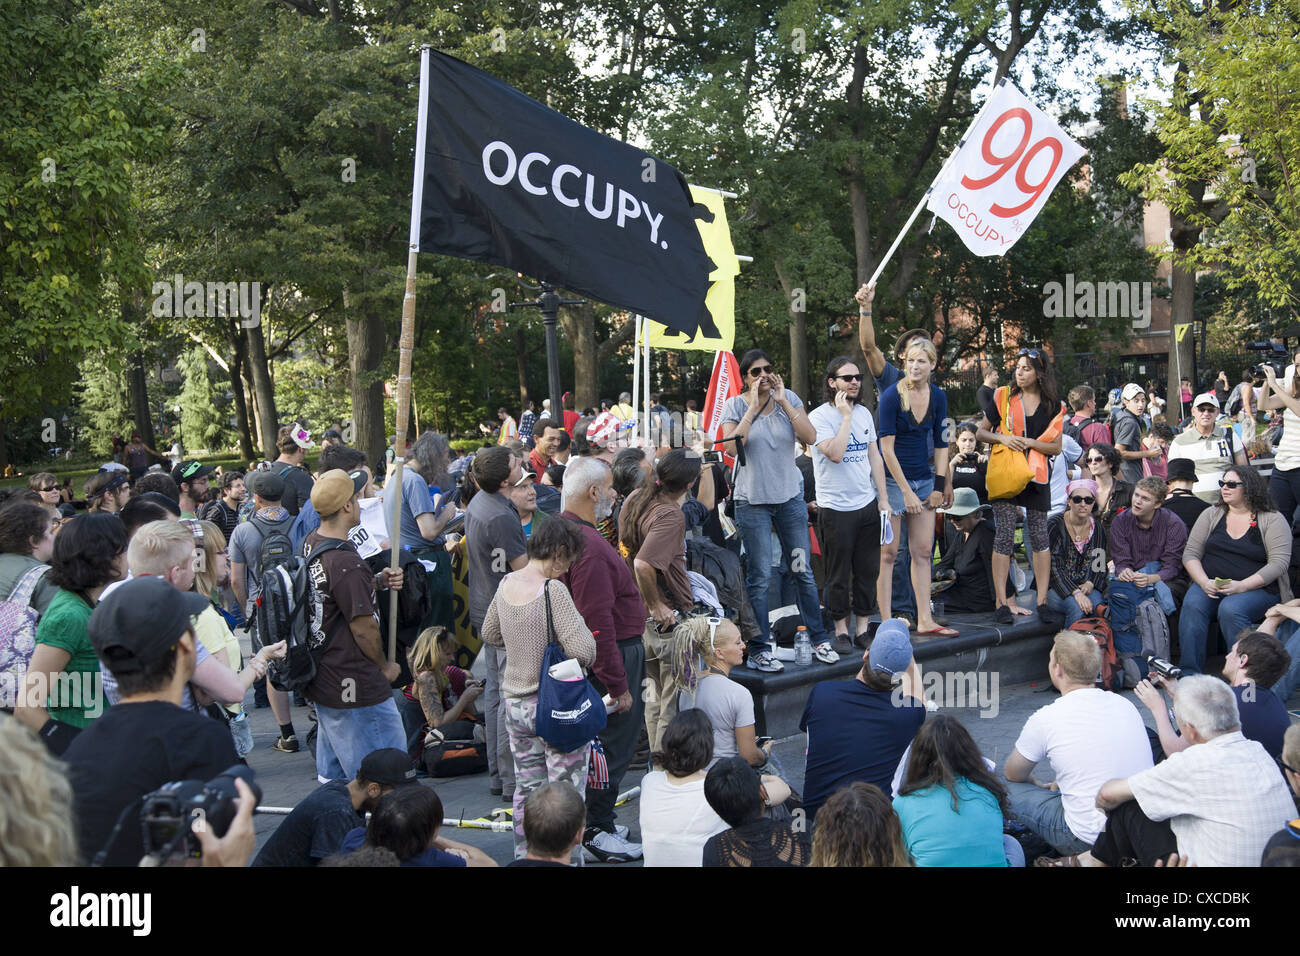 Occupy Wall Street raises its head once again, gathering at Washington Square Park, NYC,  marking its first anniversary on 9/17/12 Stock Photo